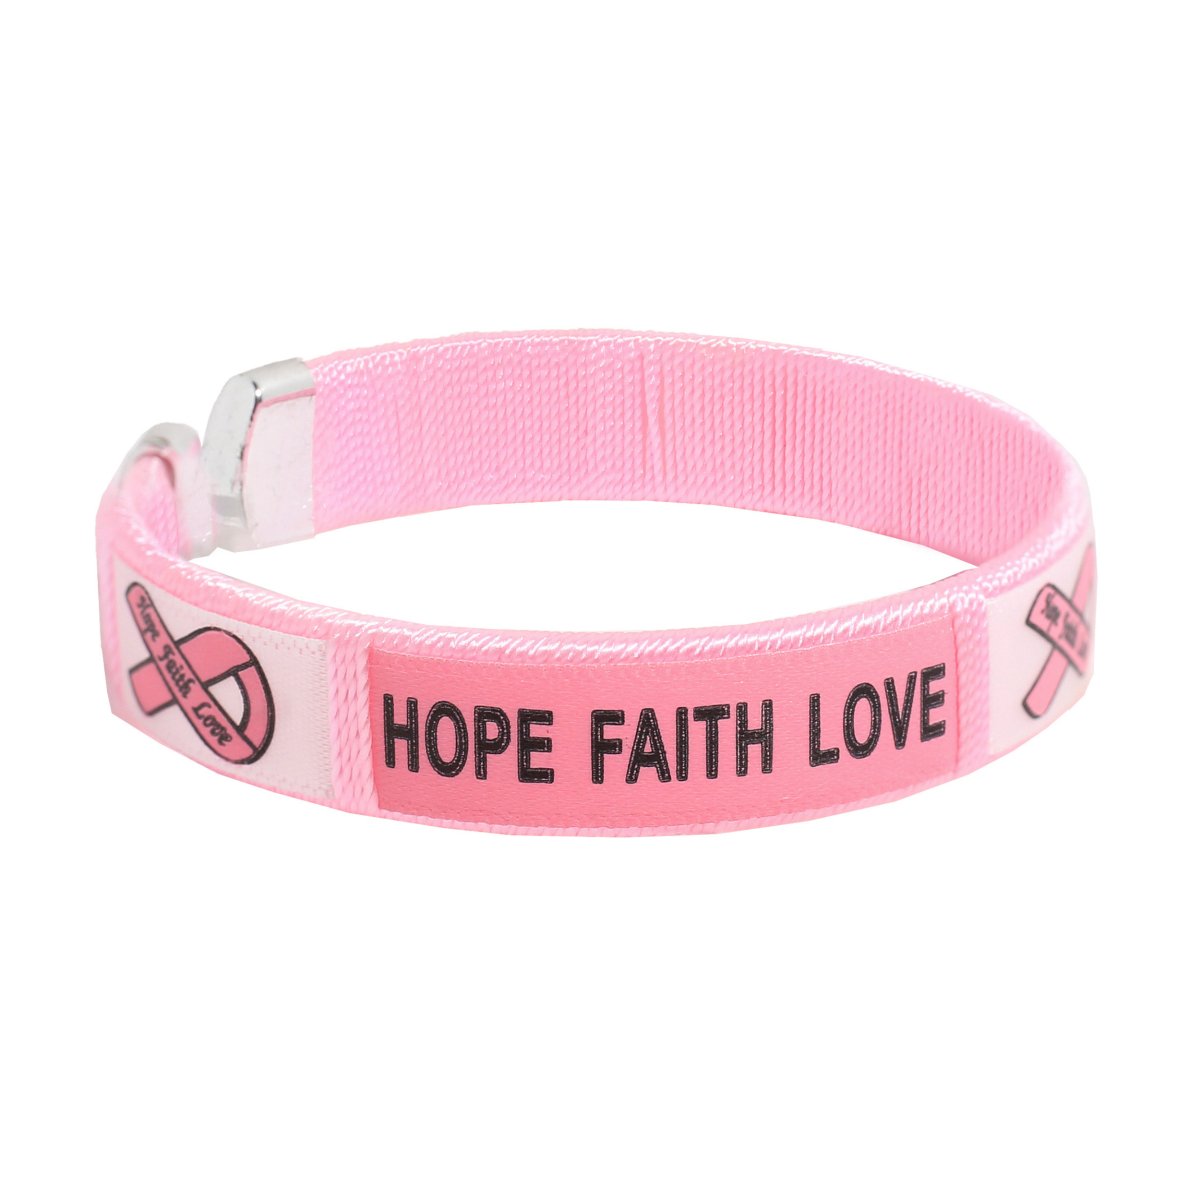 Pink Ribbon Awareness Bangle Bracelets - Fundraising For A Cause